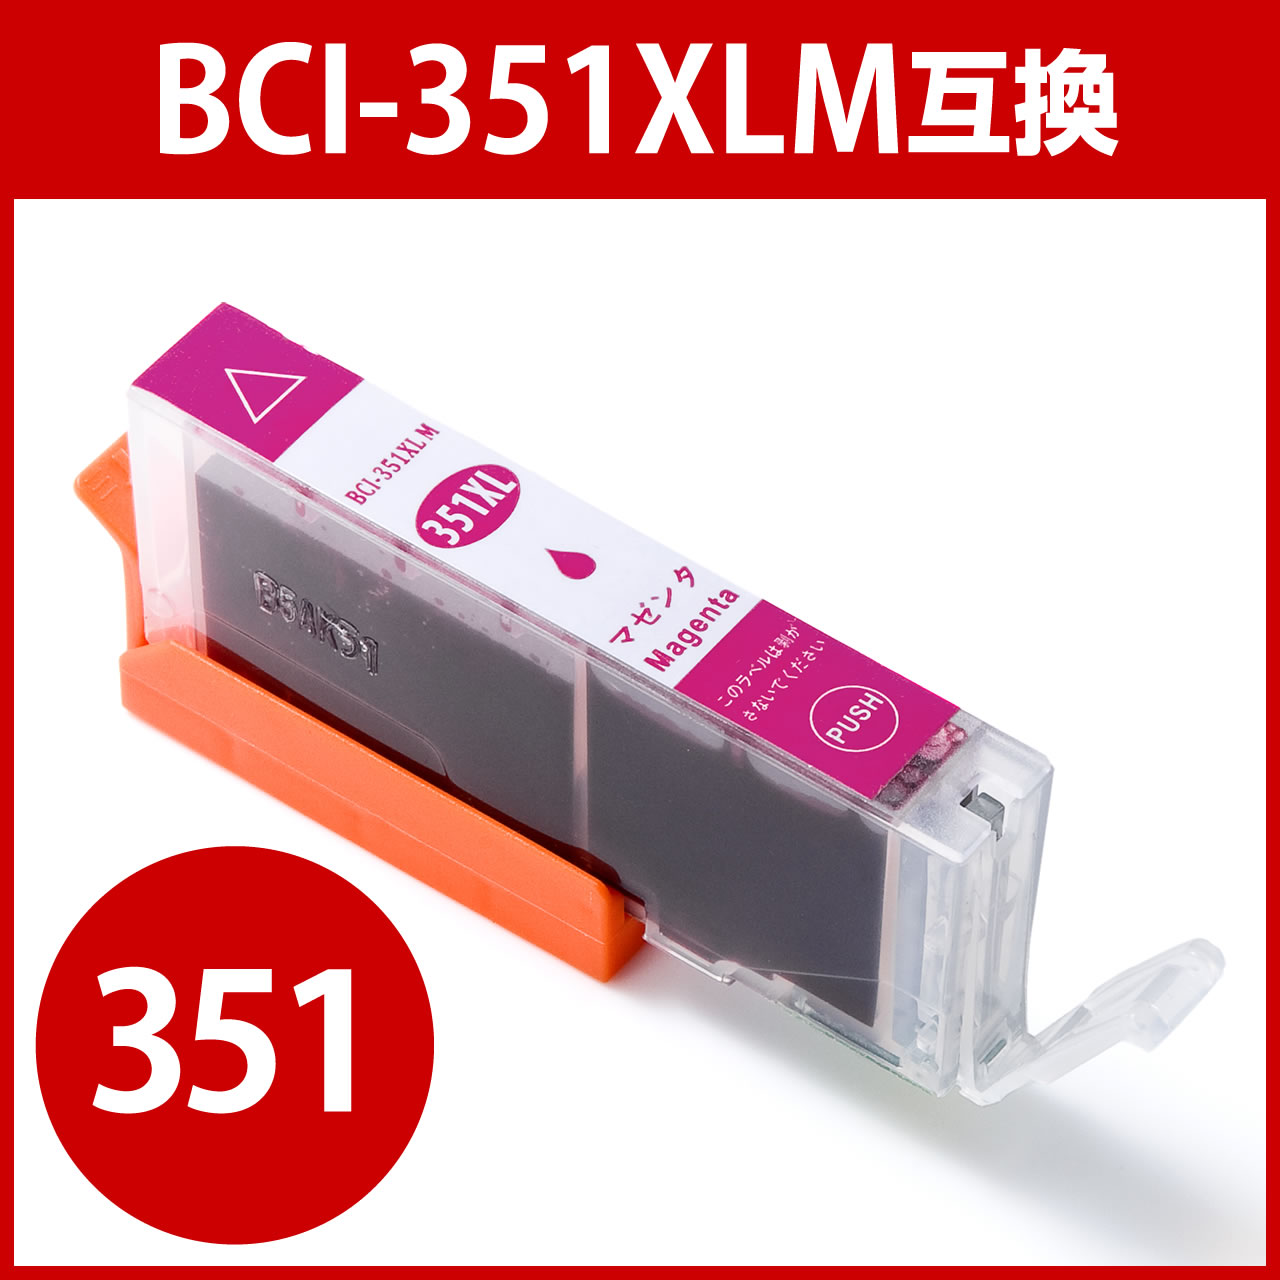 Canon BCI-351XLM - その他